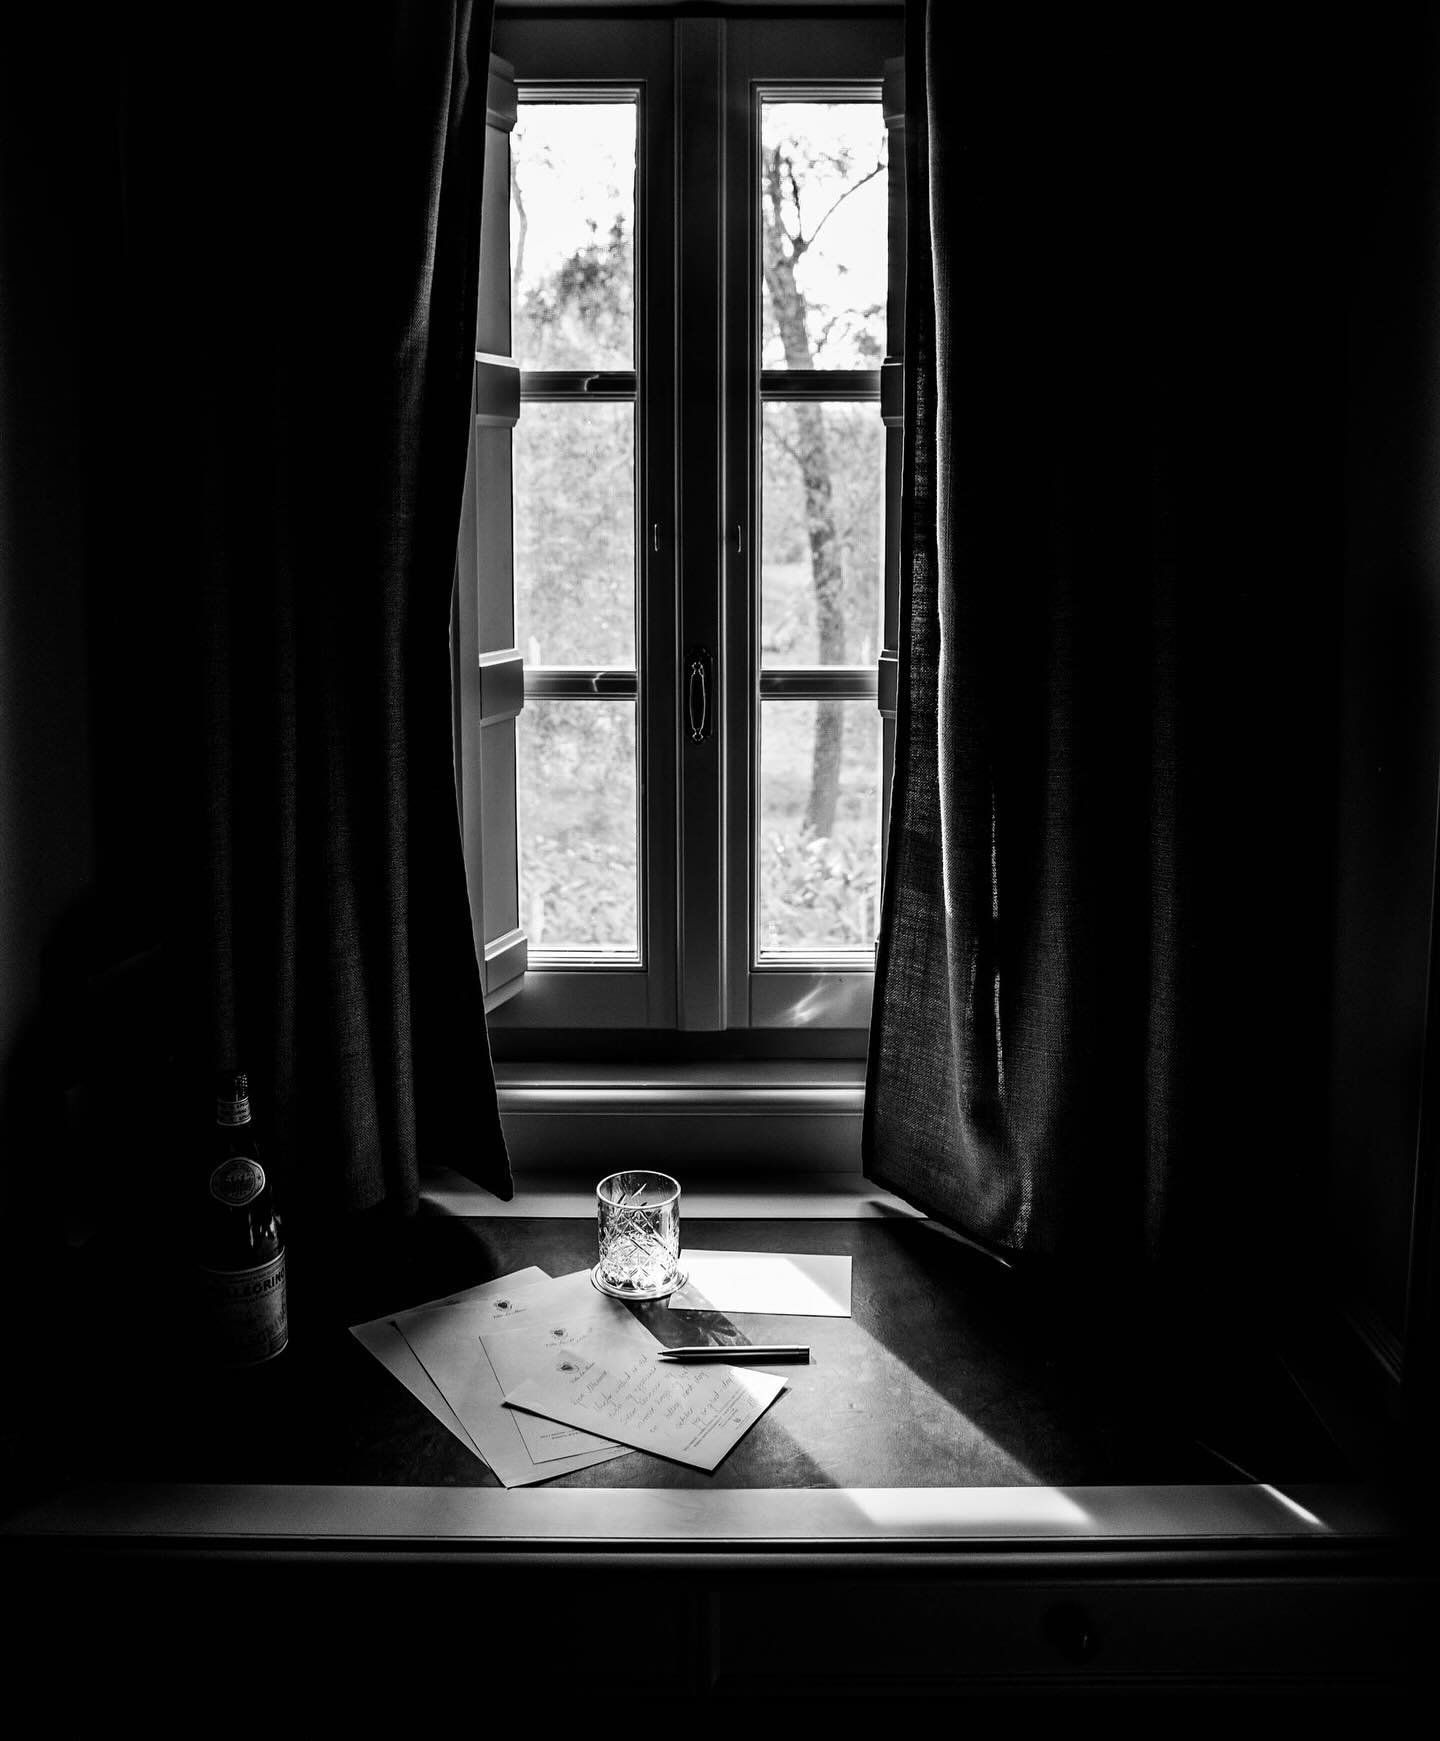 By a window in Florence, I wrote my mother a postcard. Just a little hello really. I wrote about the ripe lemons in the citrus garden outside my window, and about the warmth and beauty of Florence. I wrote that I loved her, and missed her. She&rsquo;